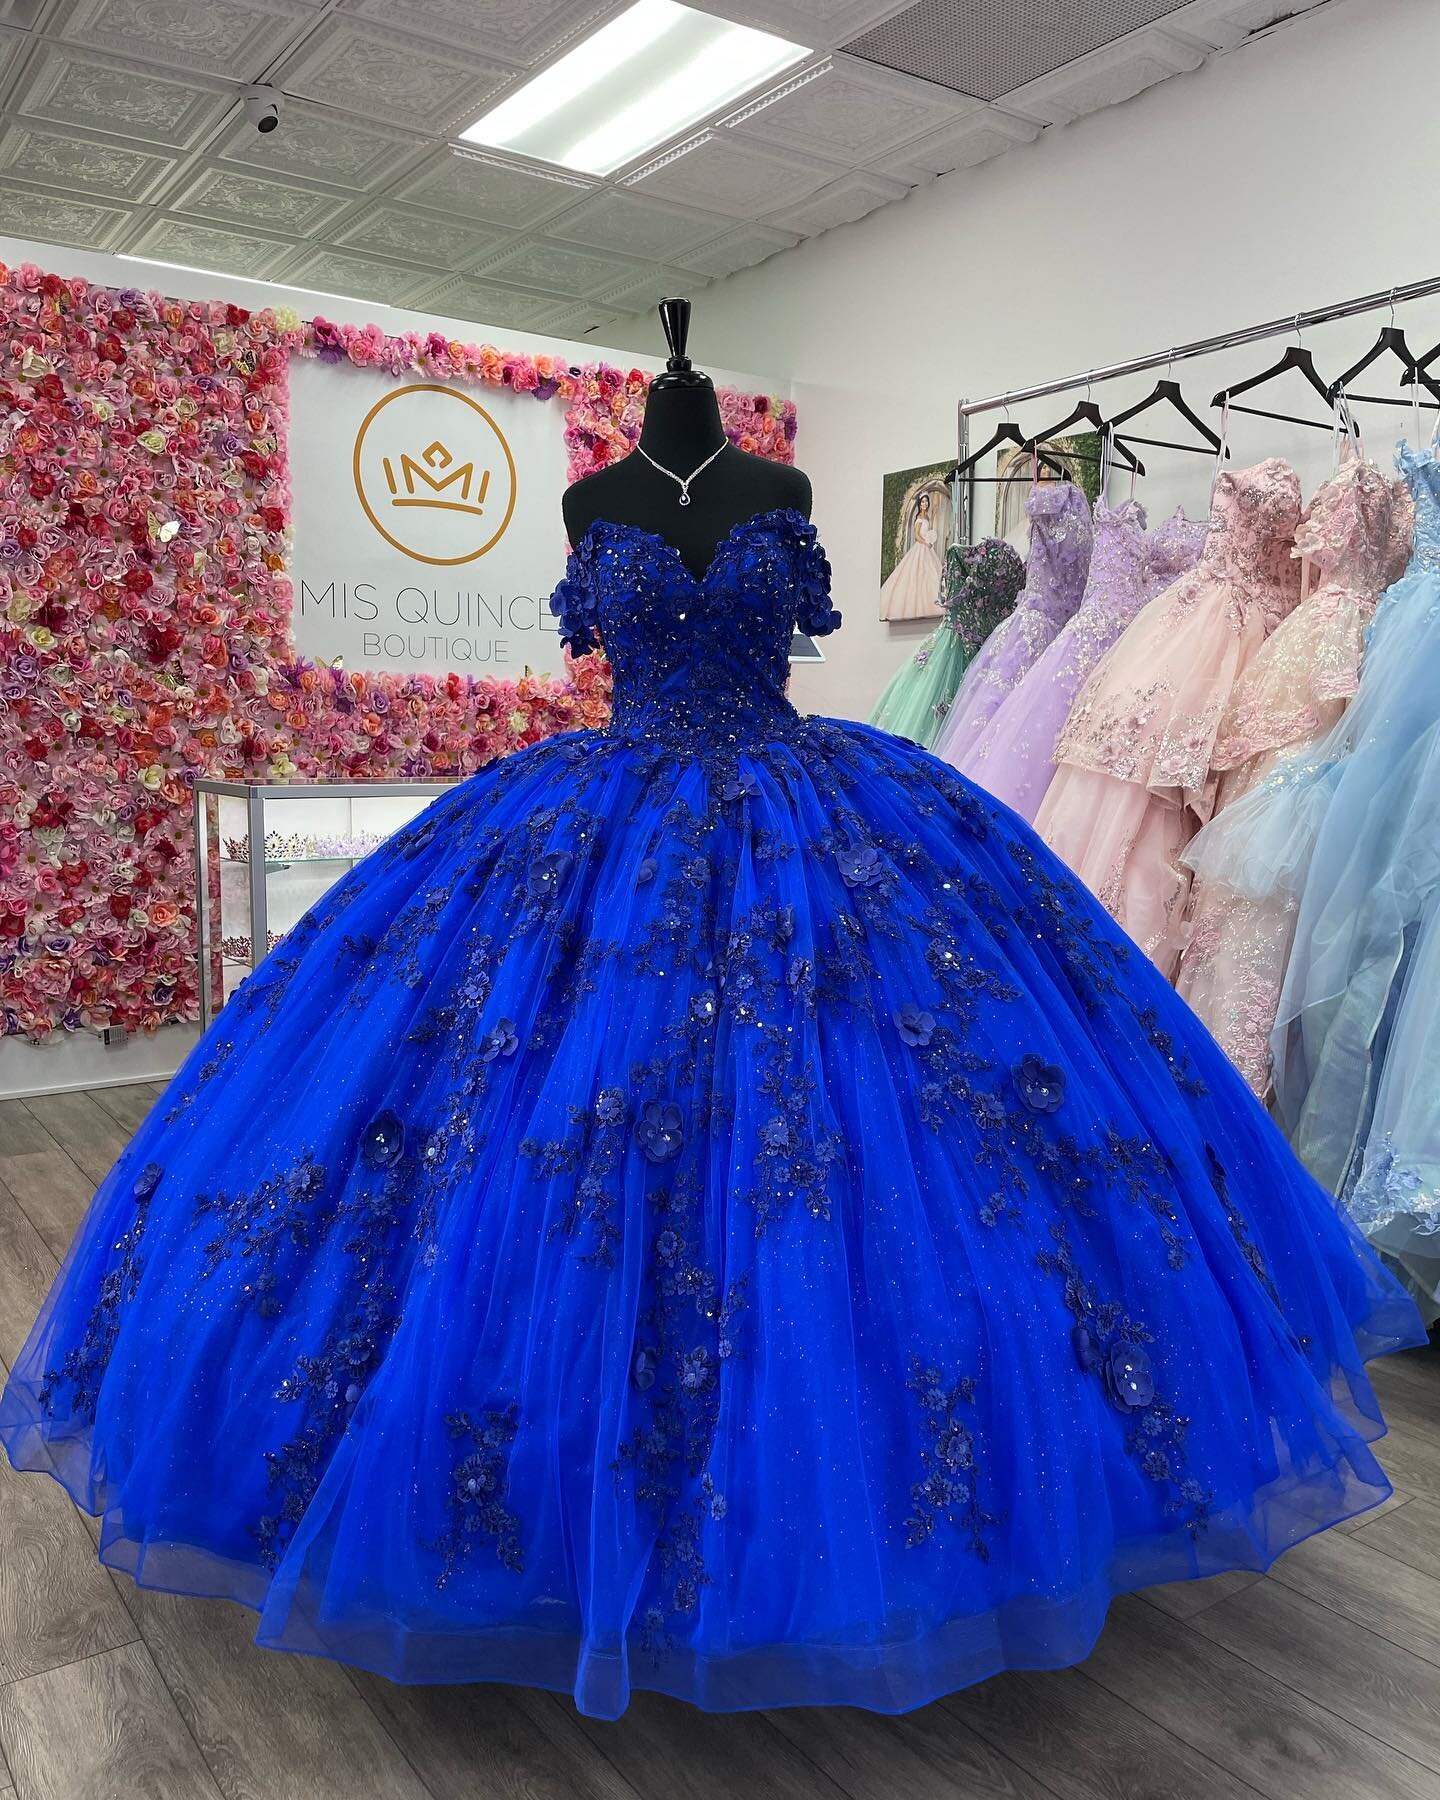 One of our favorites 💙
Also available to order in the color wine.
.
.
.
. 
.
.
#misquince #misquincea&ntilde;os #mis15a&ntilde;os #quinceneradresses #morileeofficial